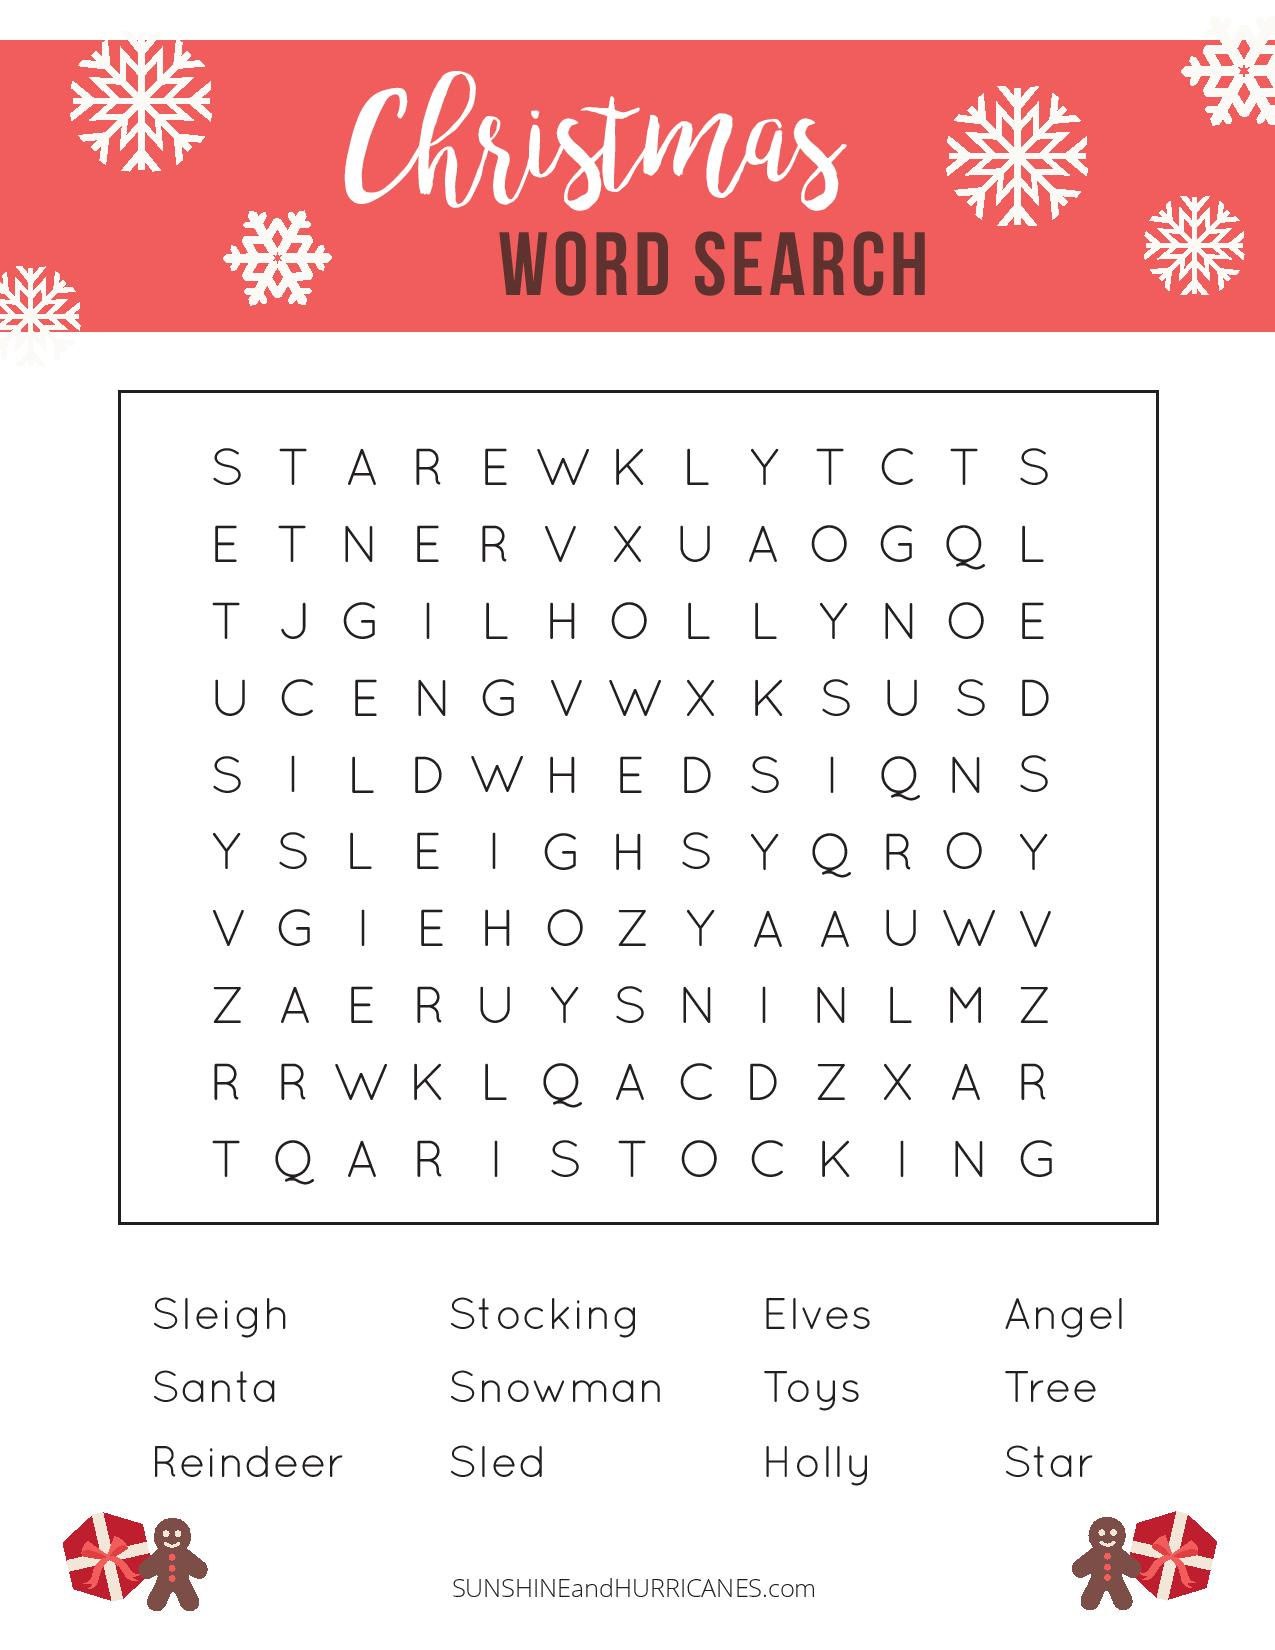 Printable Christmas Word Search - A Fun Holiday Activity For Kids - Free Printable Christmas Word Games For Adults